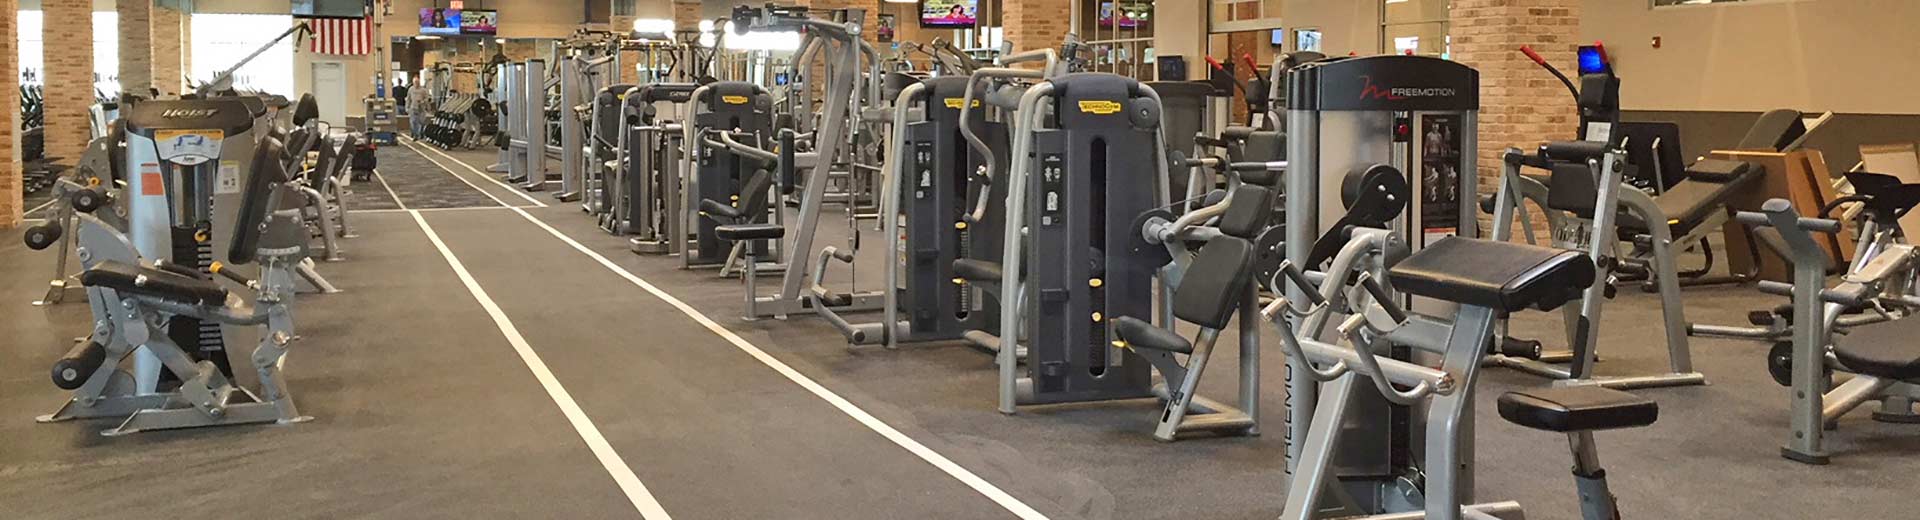 chicago east lakeview gym amenities | xsport fitness